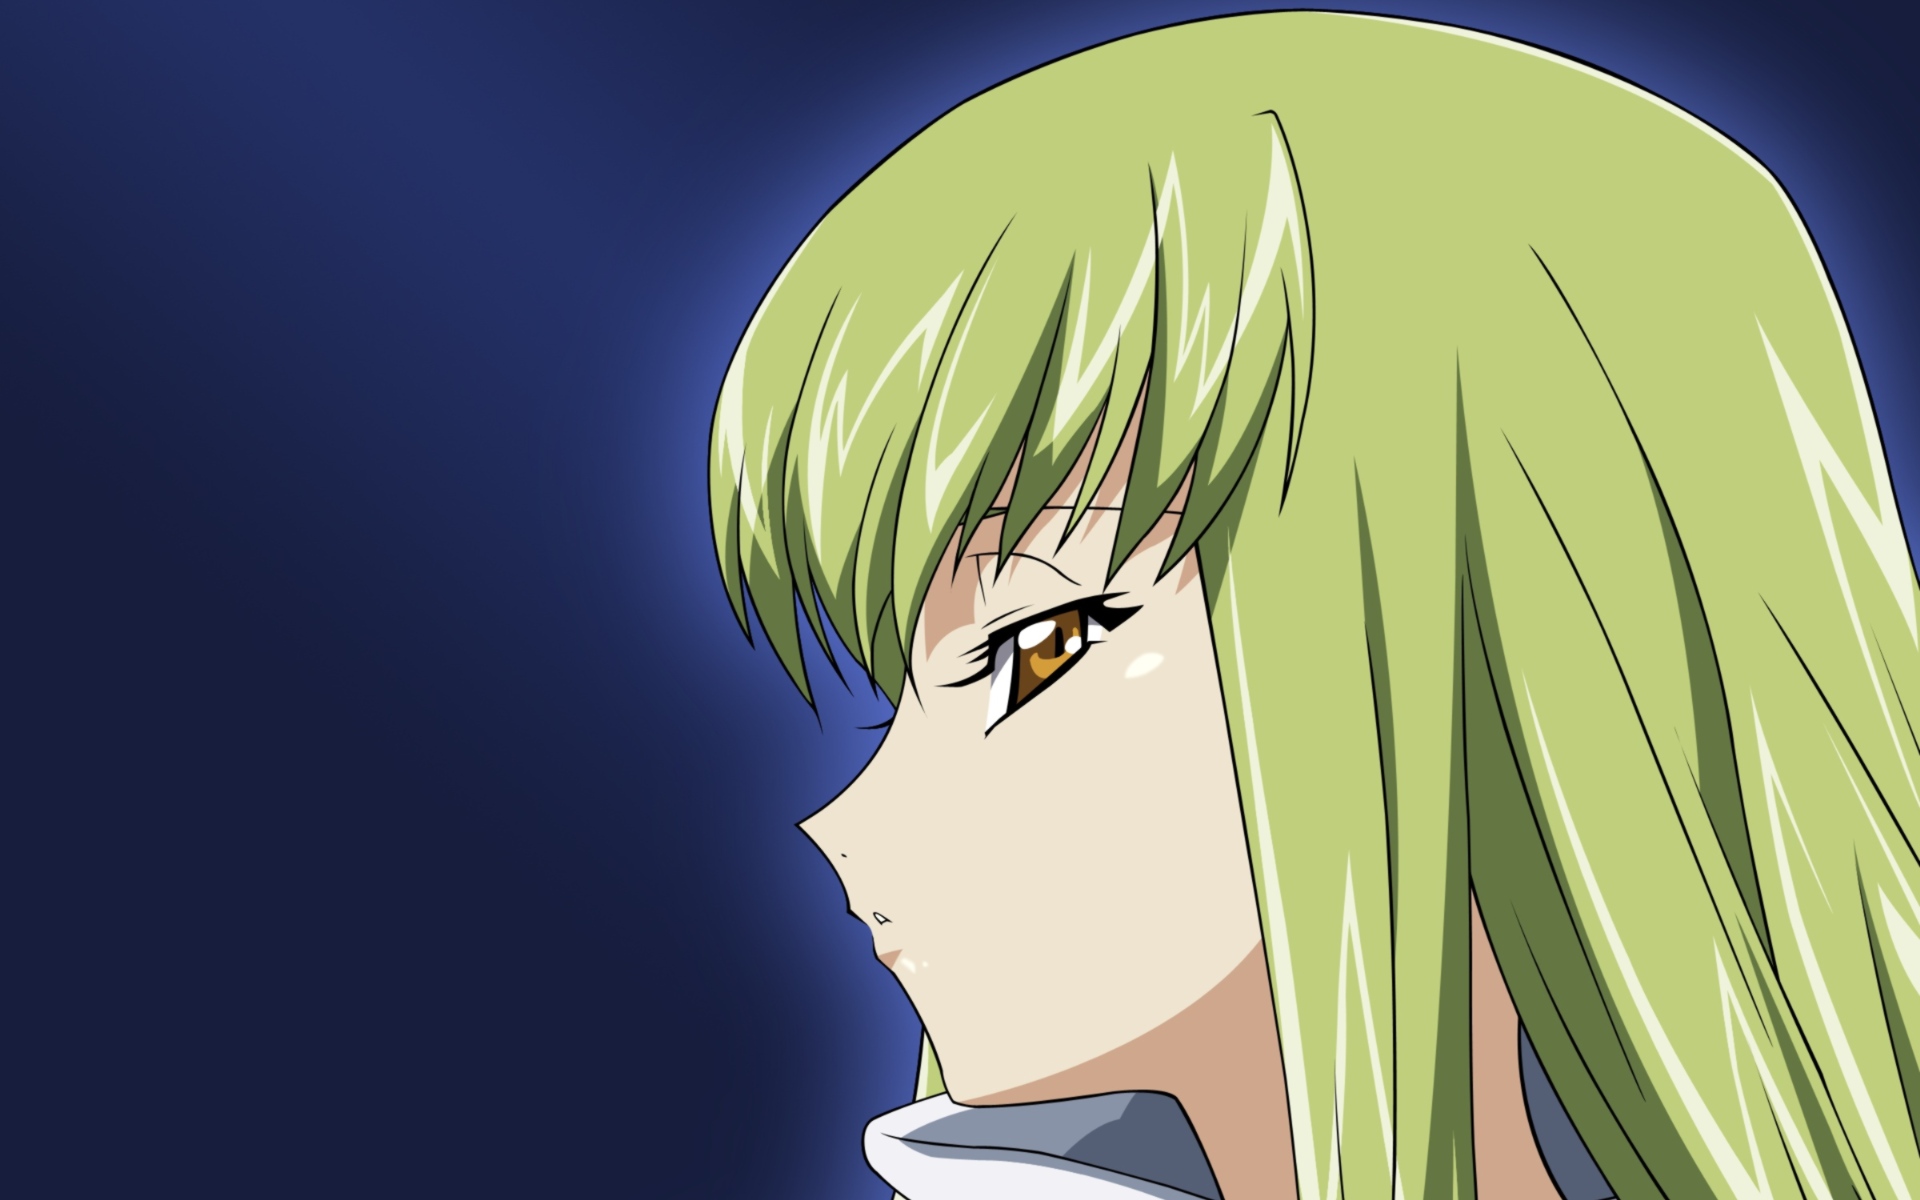 C.C., from Code Geass, in stunning high definition.